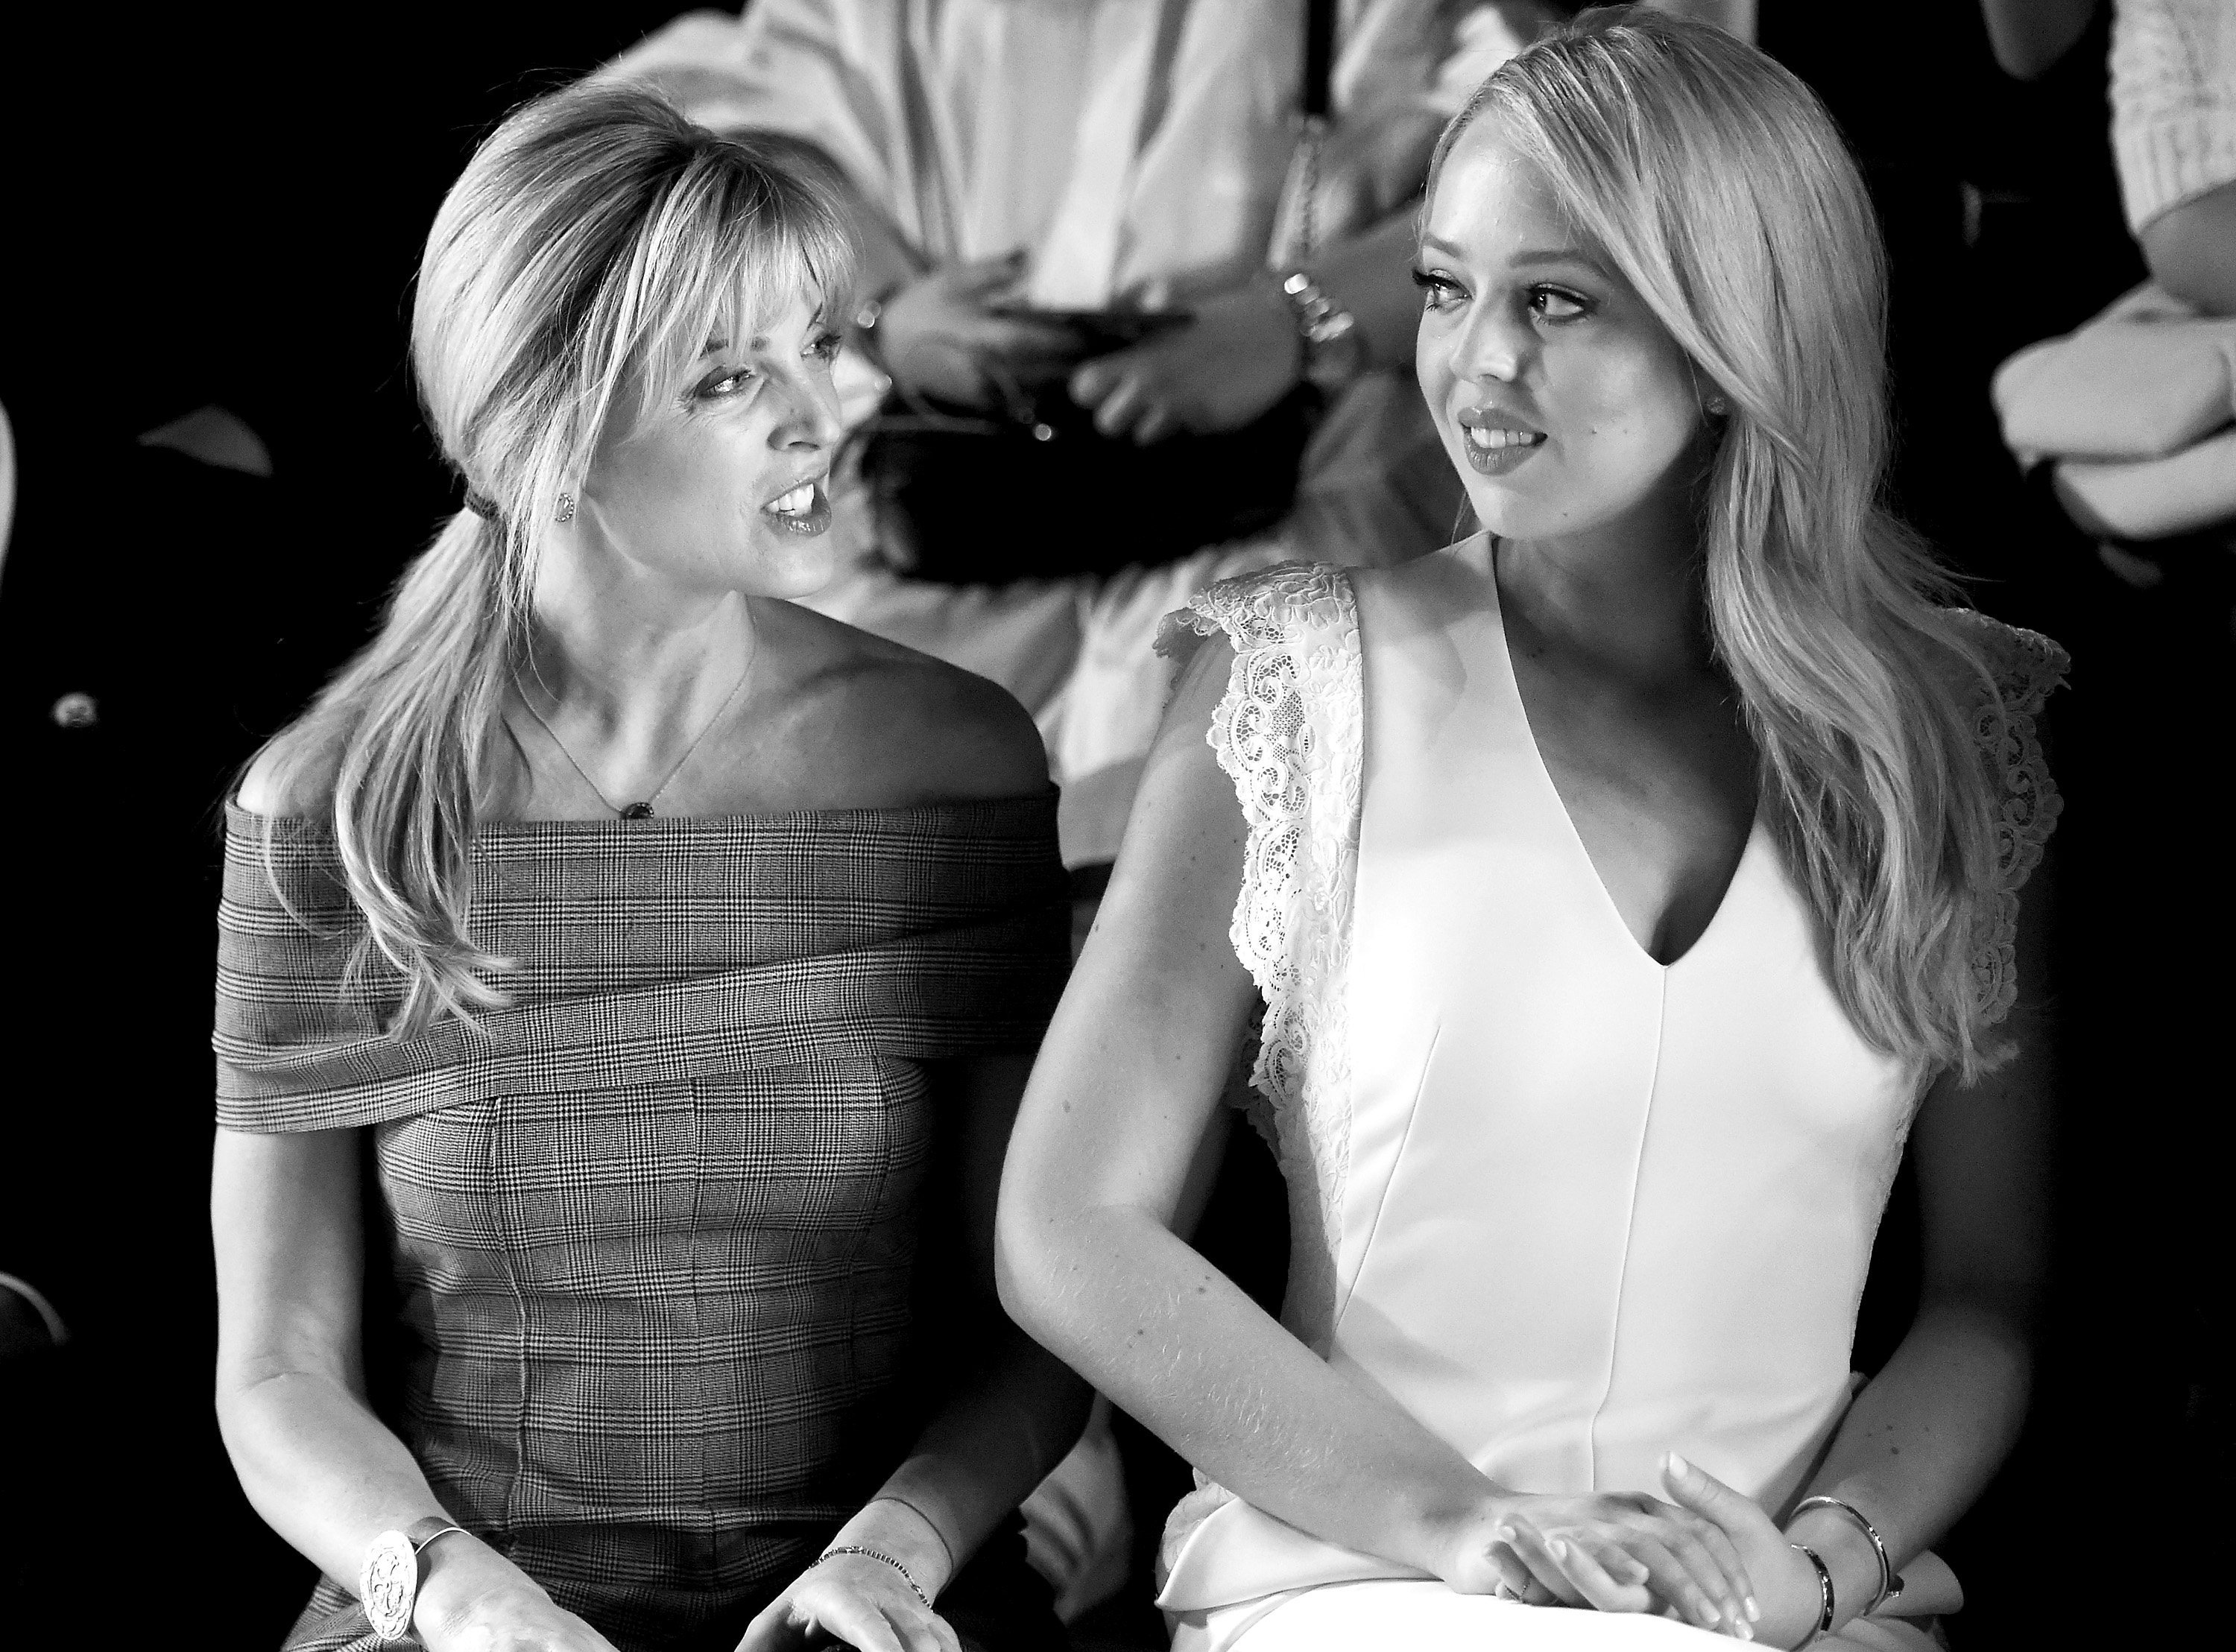 Marla Maples and Tiffany Trump at the Taoray Wang collection during, New York Fashion Week | Photo: Getty Images